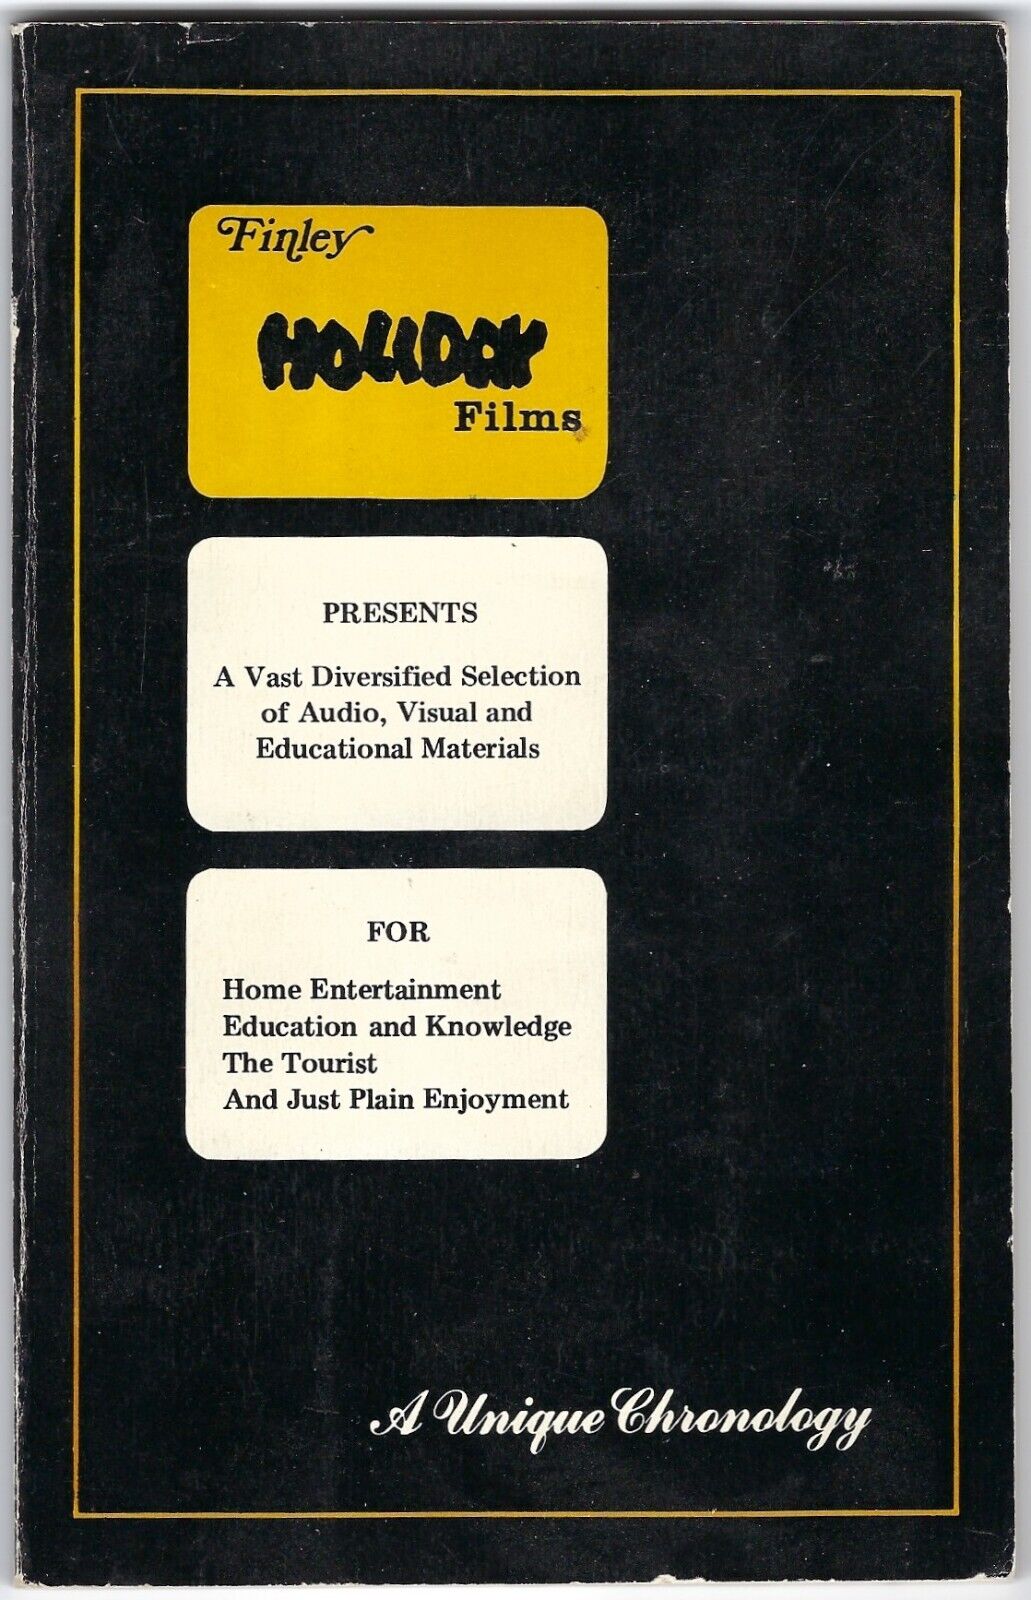 Vintage FINLEY HOLIDAY FILM Corp 1976 CATALOG 112 Pages +Inserts slide cassette 